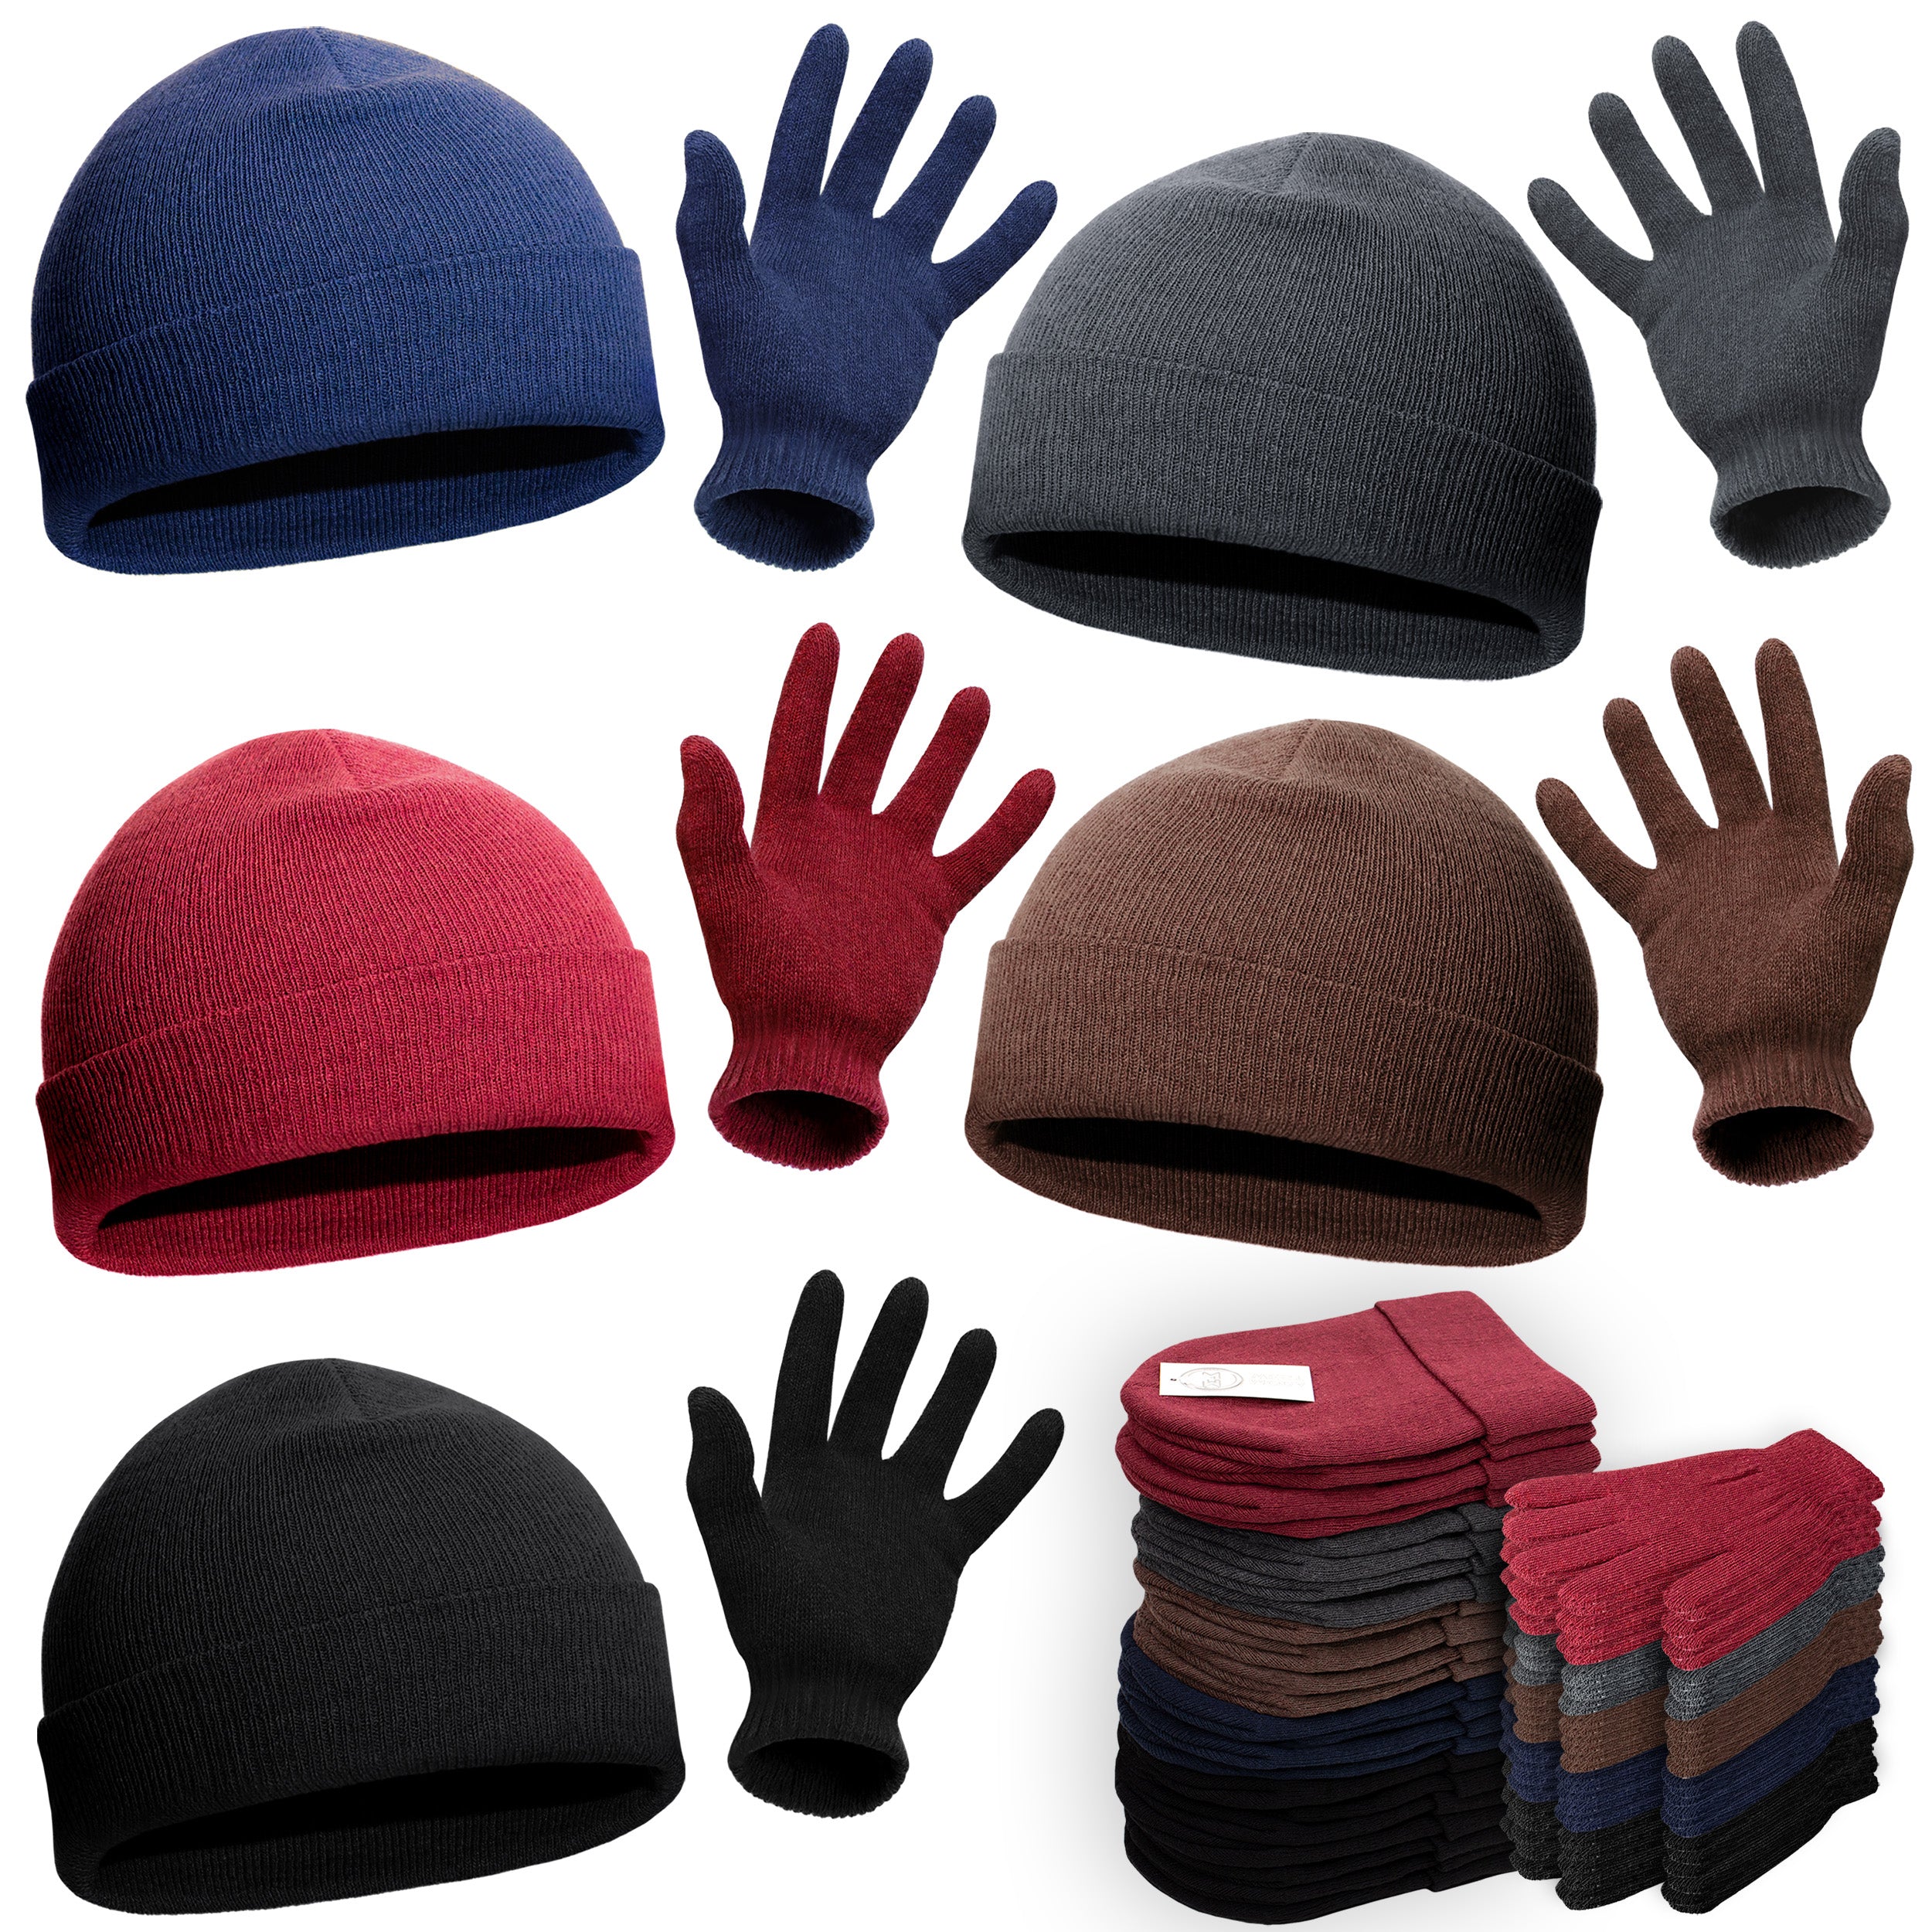 24 Set Wholesale Beanie and Glove Bundle in 5 Assorted Colors - Bulk Case of 24 Beanies, 24 Pairs of Gloves